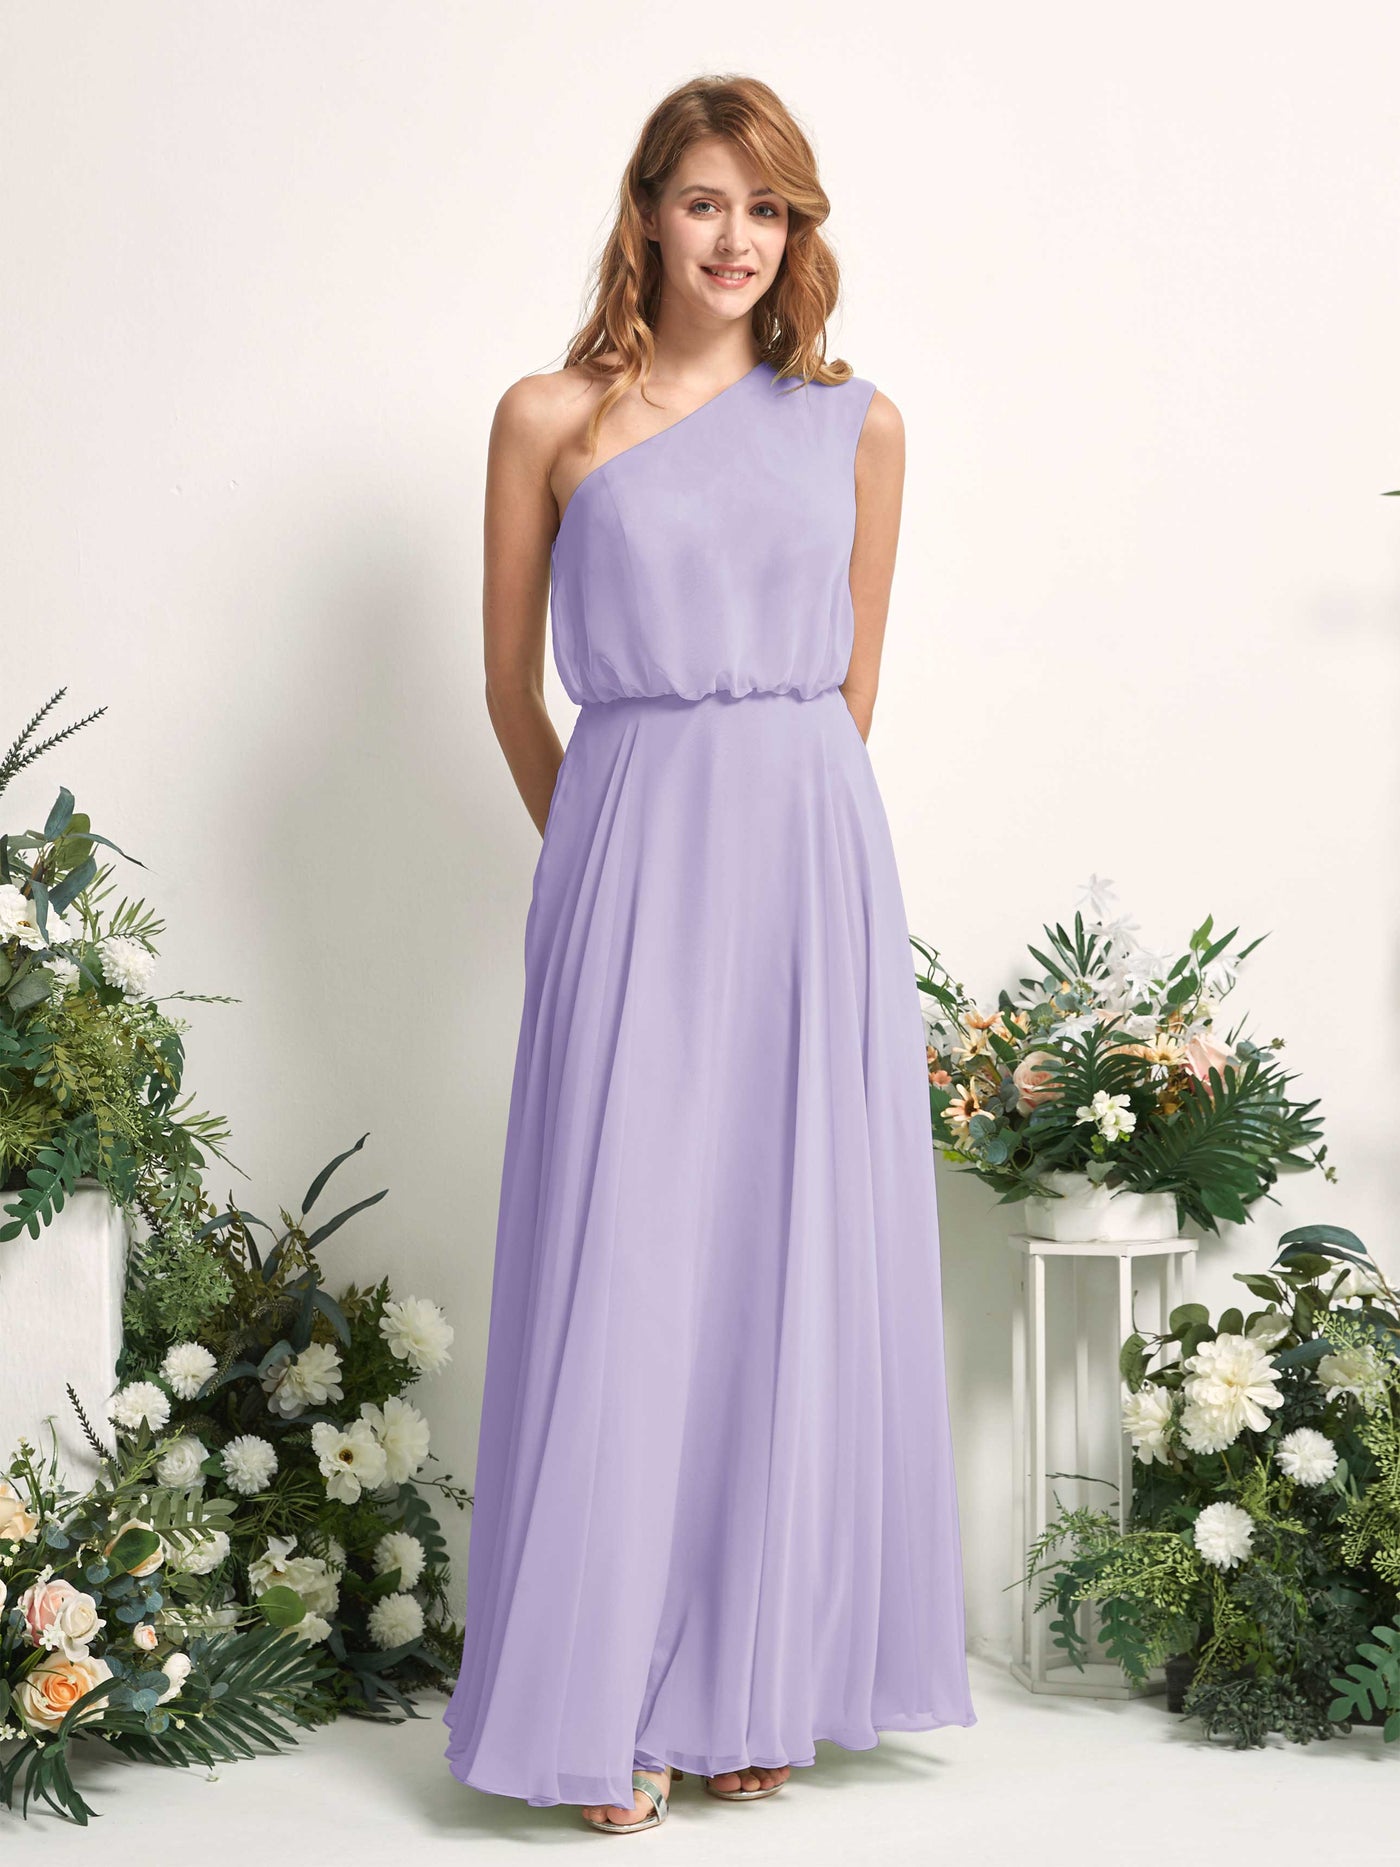 Bridesmaid Dress A-line Chiffon One Shoulder Full Length Sleeveless Wedding Party Dress - Lilac (81226814)#color_lilac